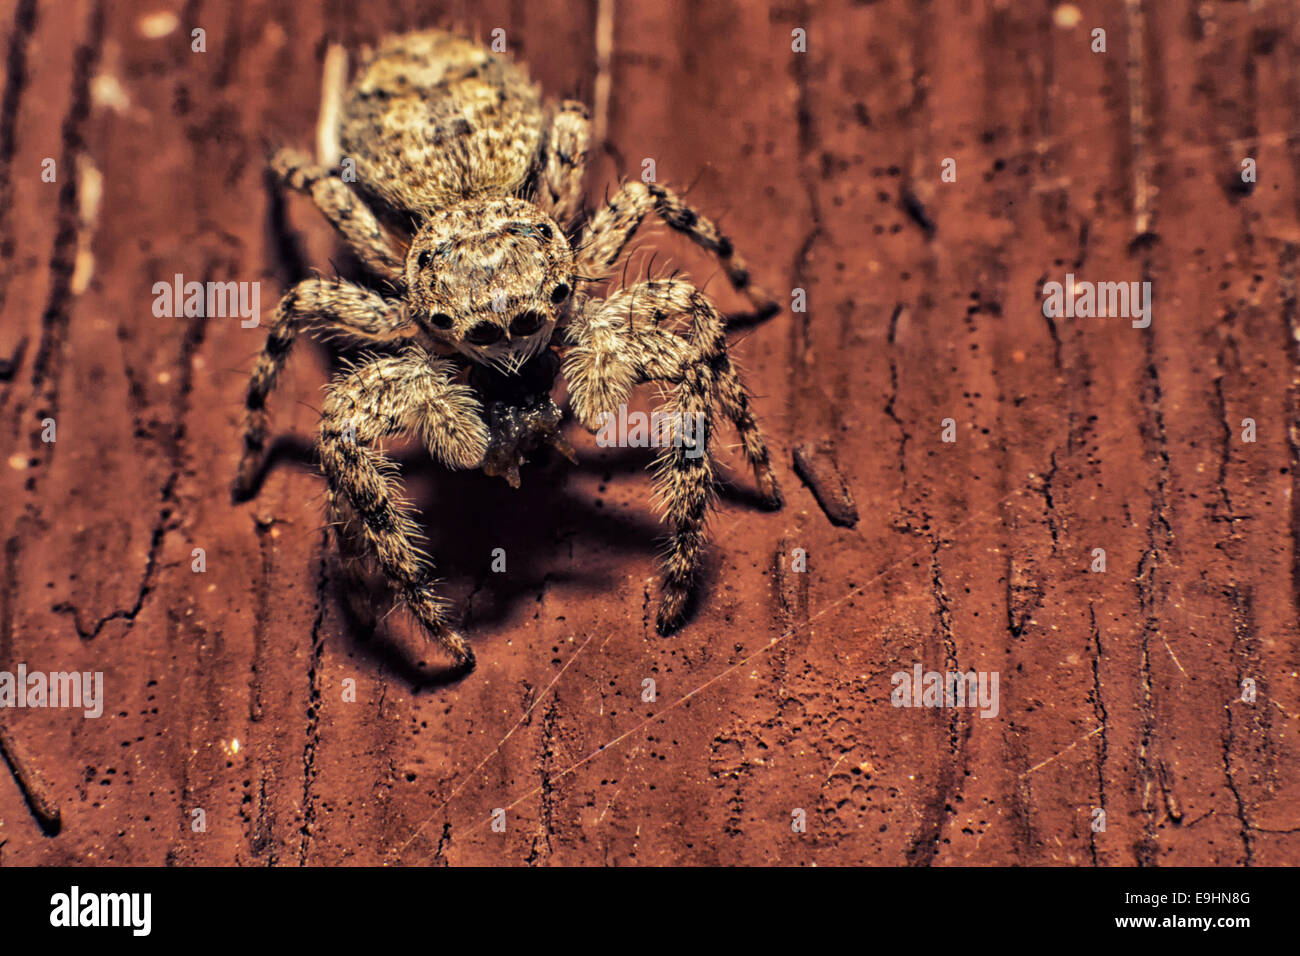 Jumping spider Foto Stock